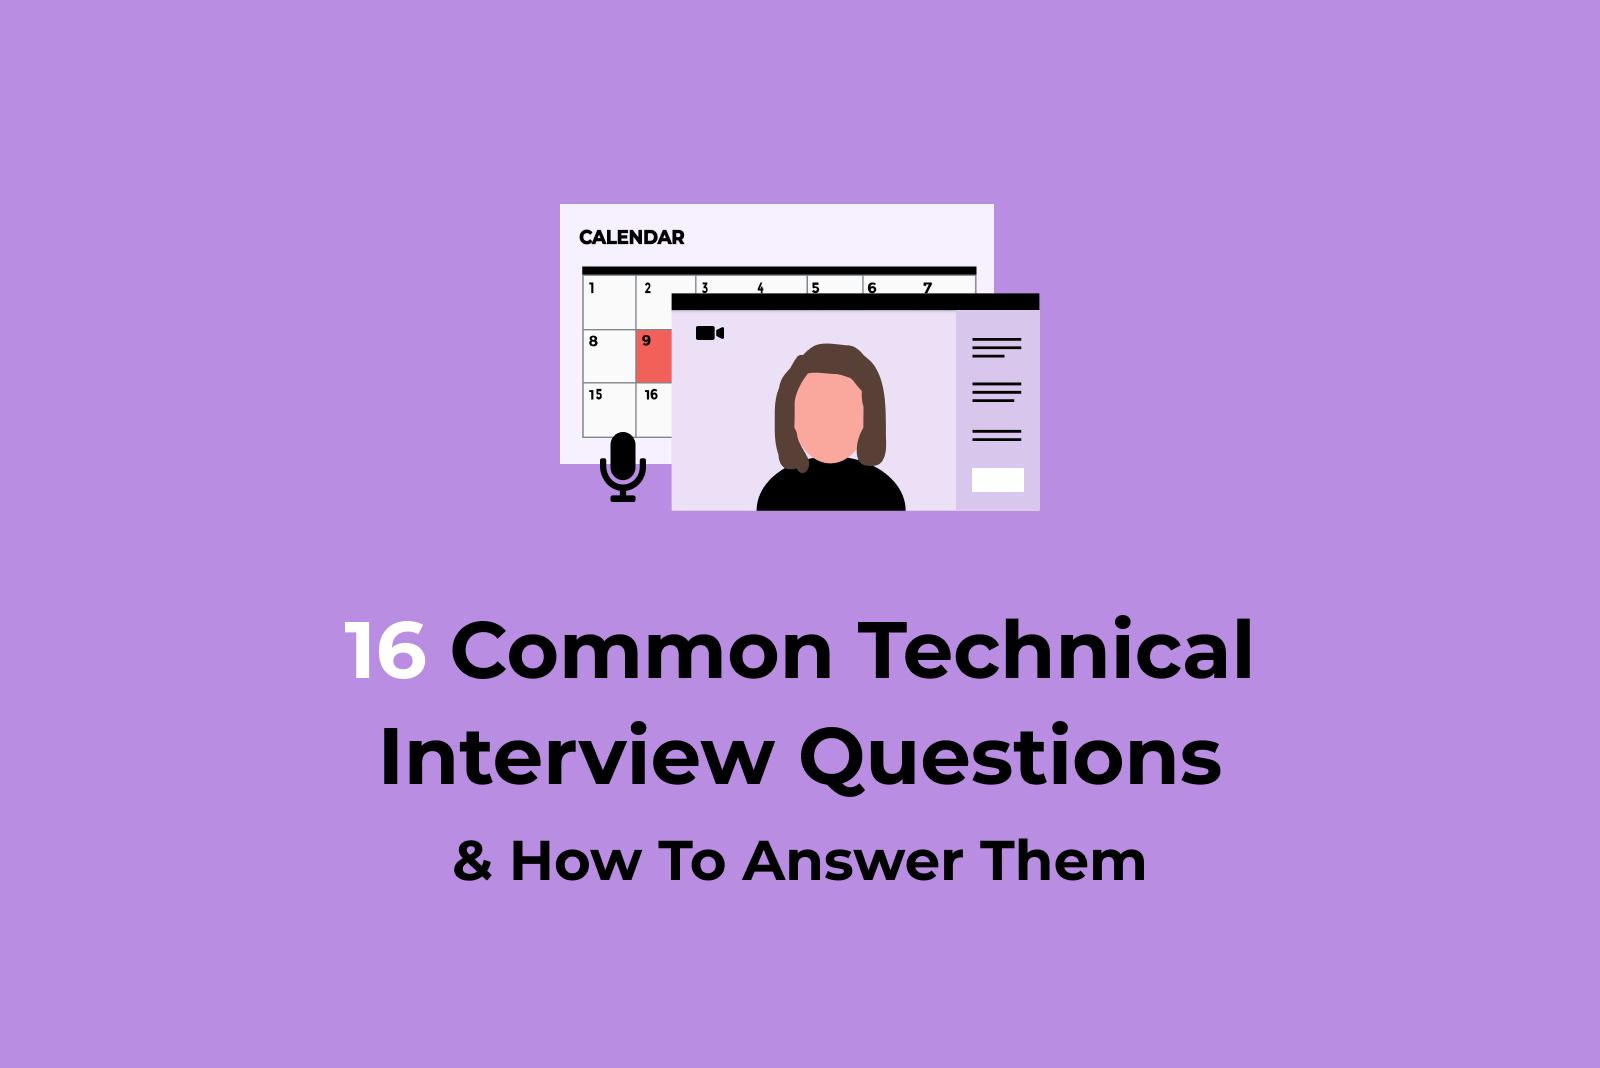 16 Common Technical Interview Questions and how to answer them